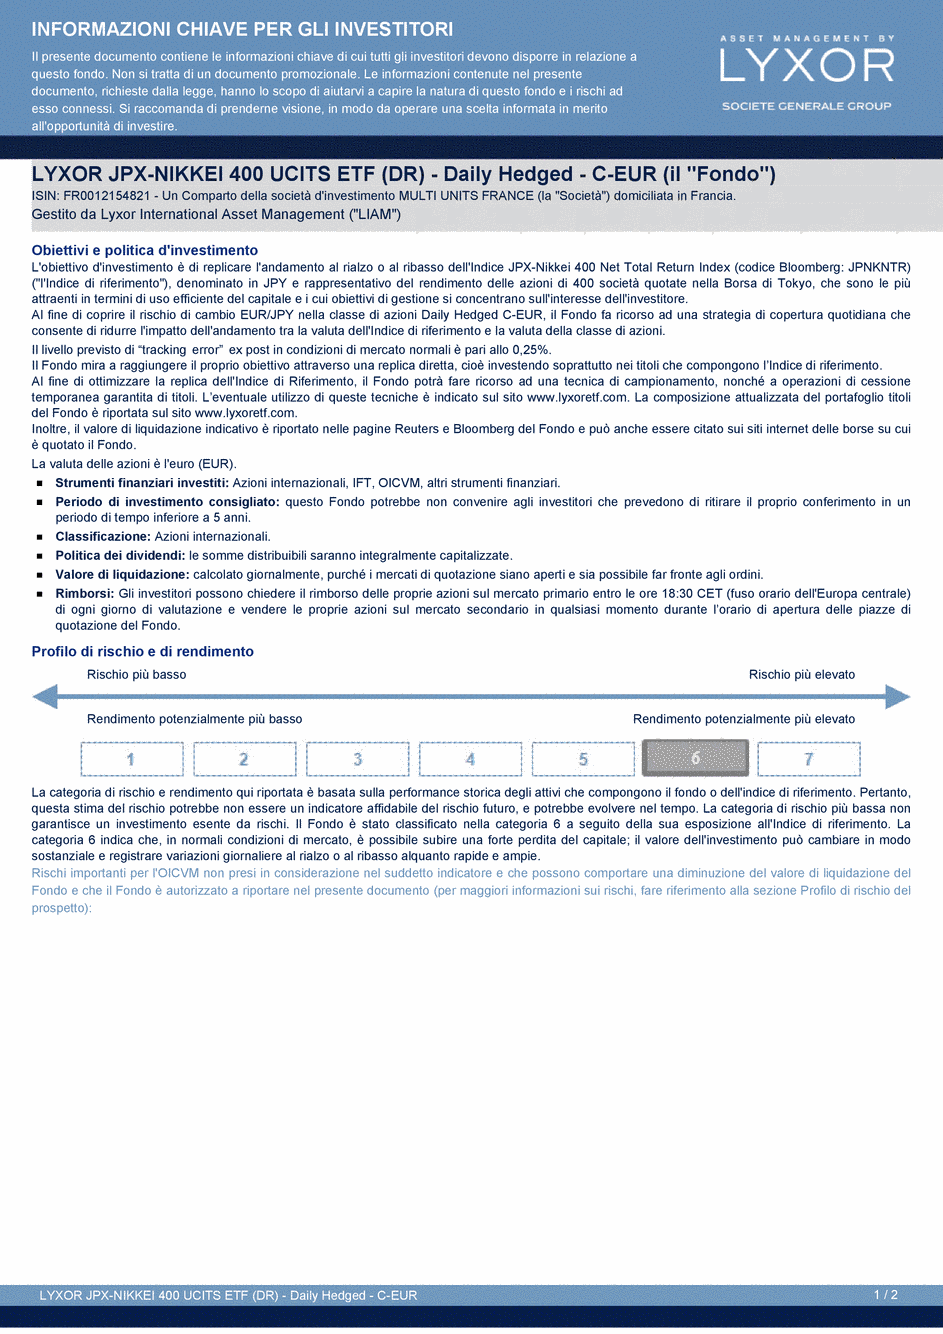 DICI LYXOR JPX-NIKKEI 400 UCITS ETF (DR) Daily Hedged C-EUR - 20/08/2015 - Italien